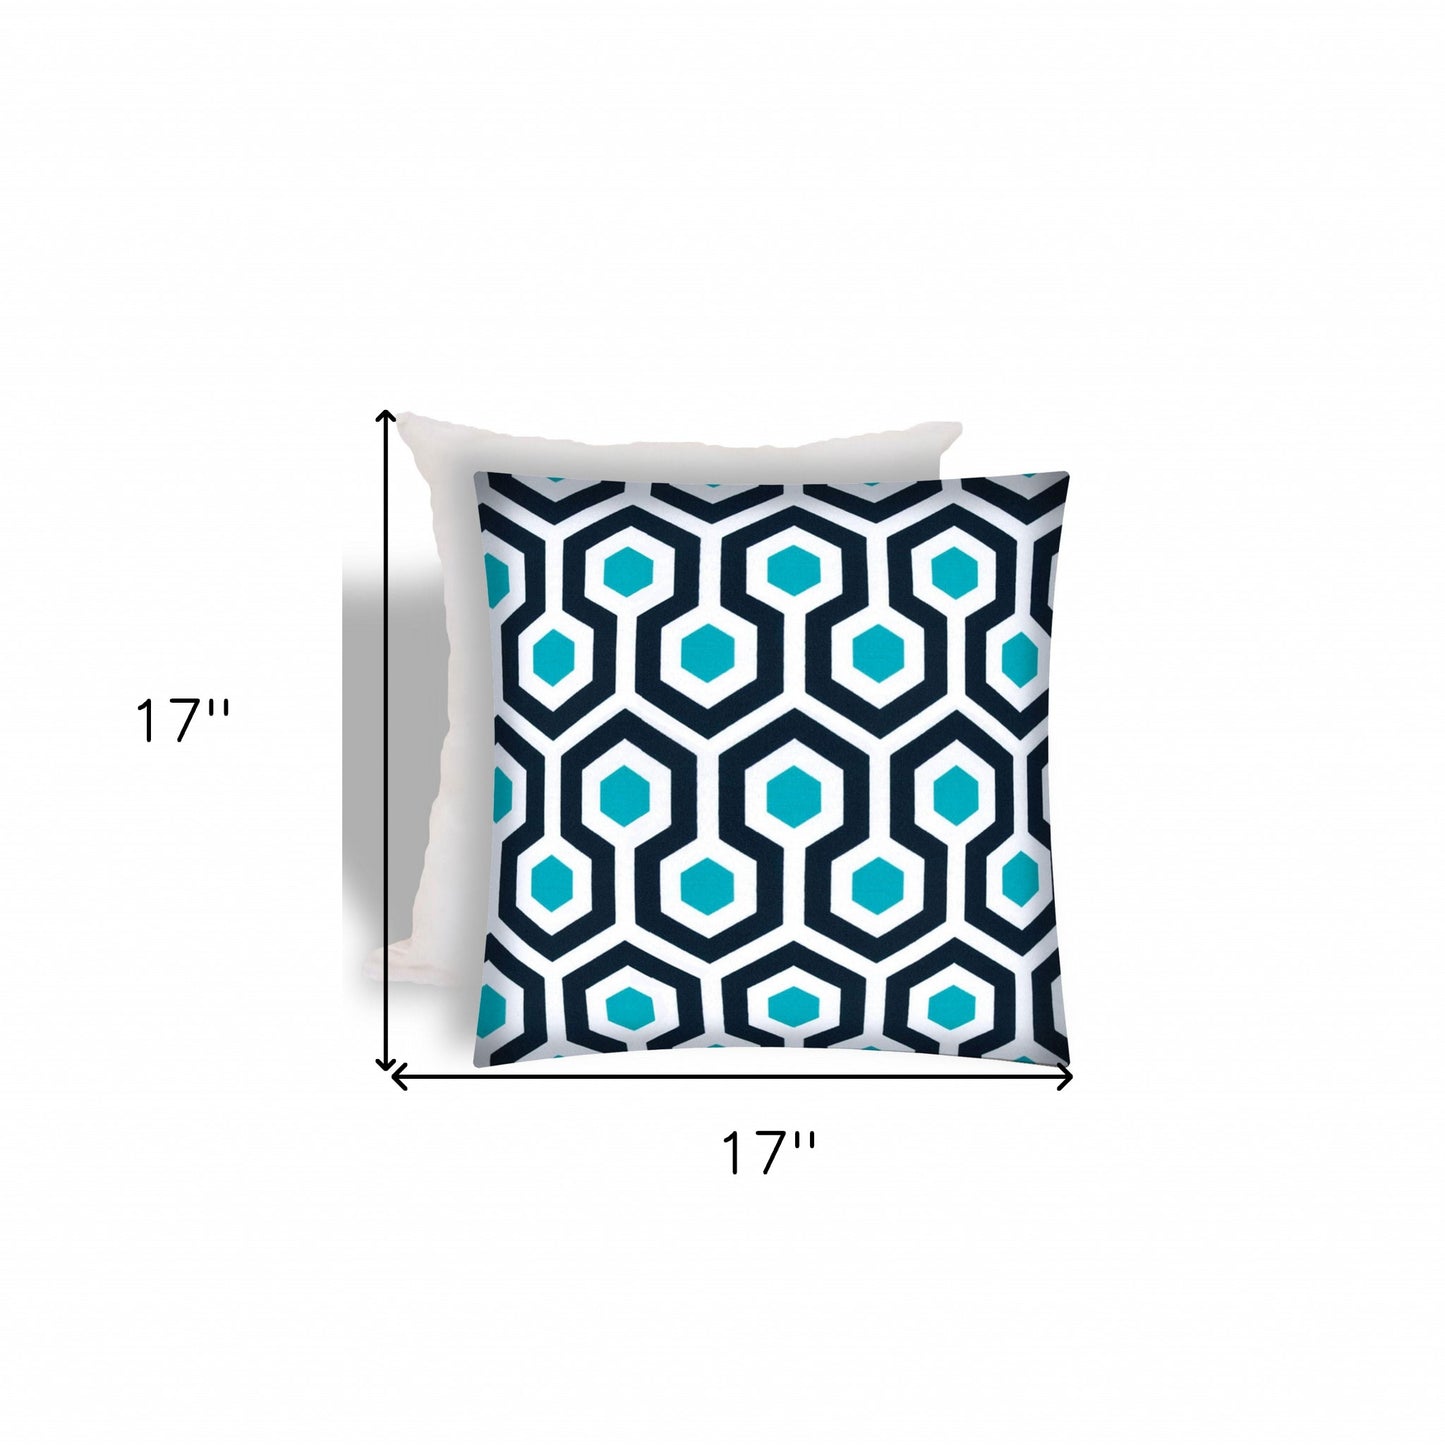 17" X 17" White And Aqua Zippered Geometric Throw Indoor Outdoor Pillow